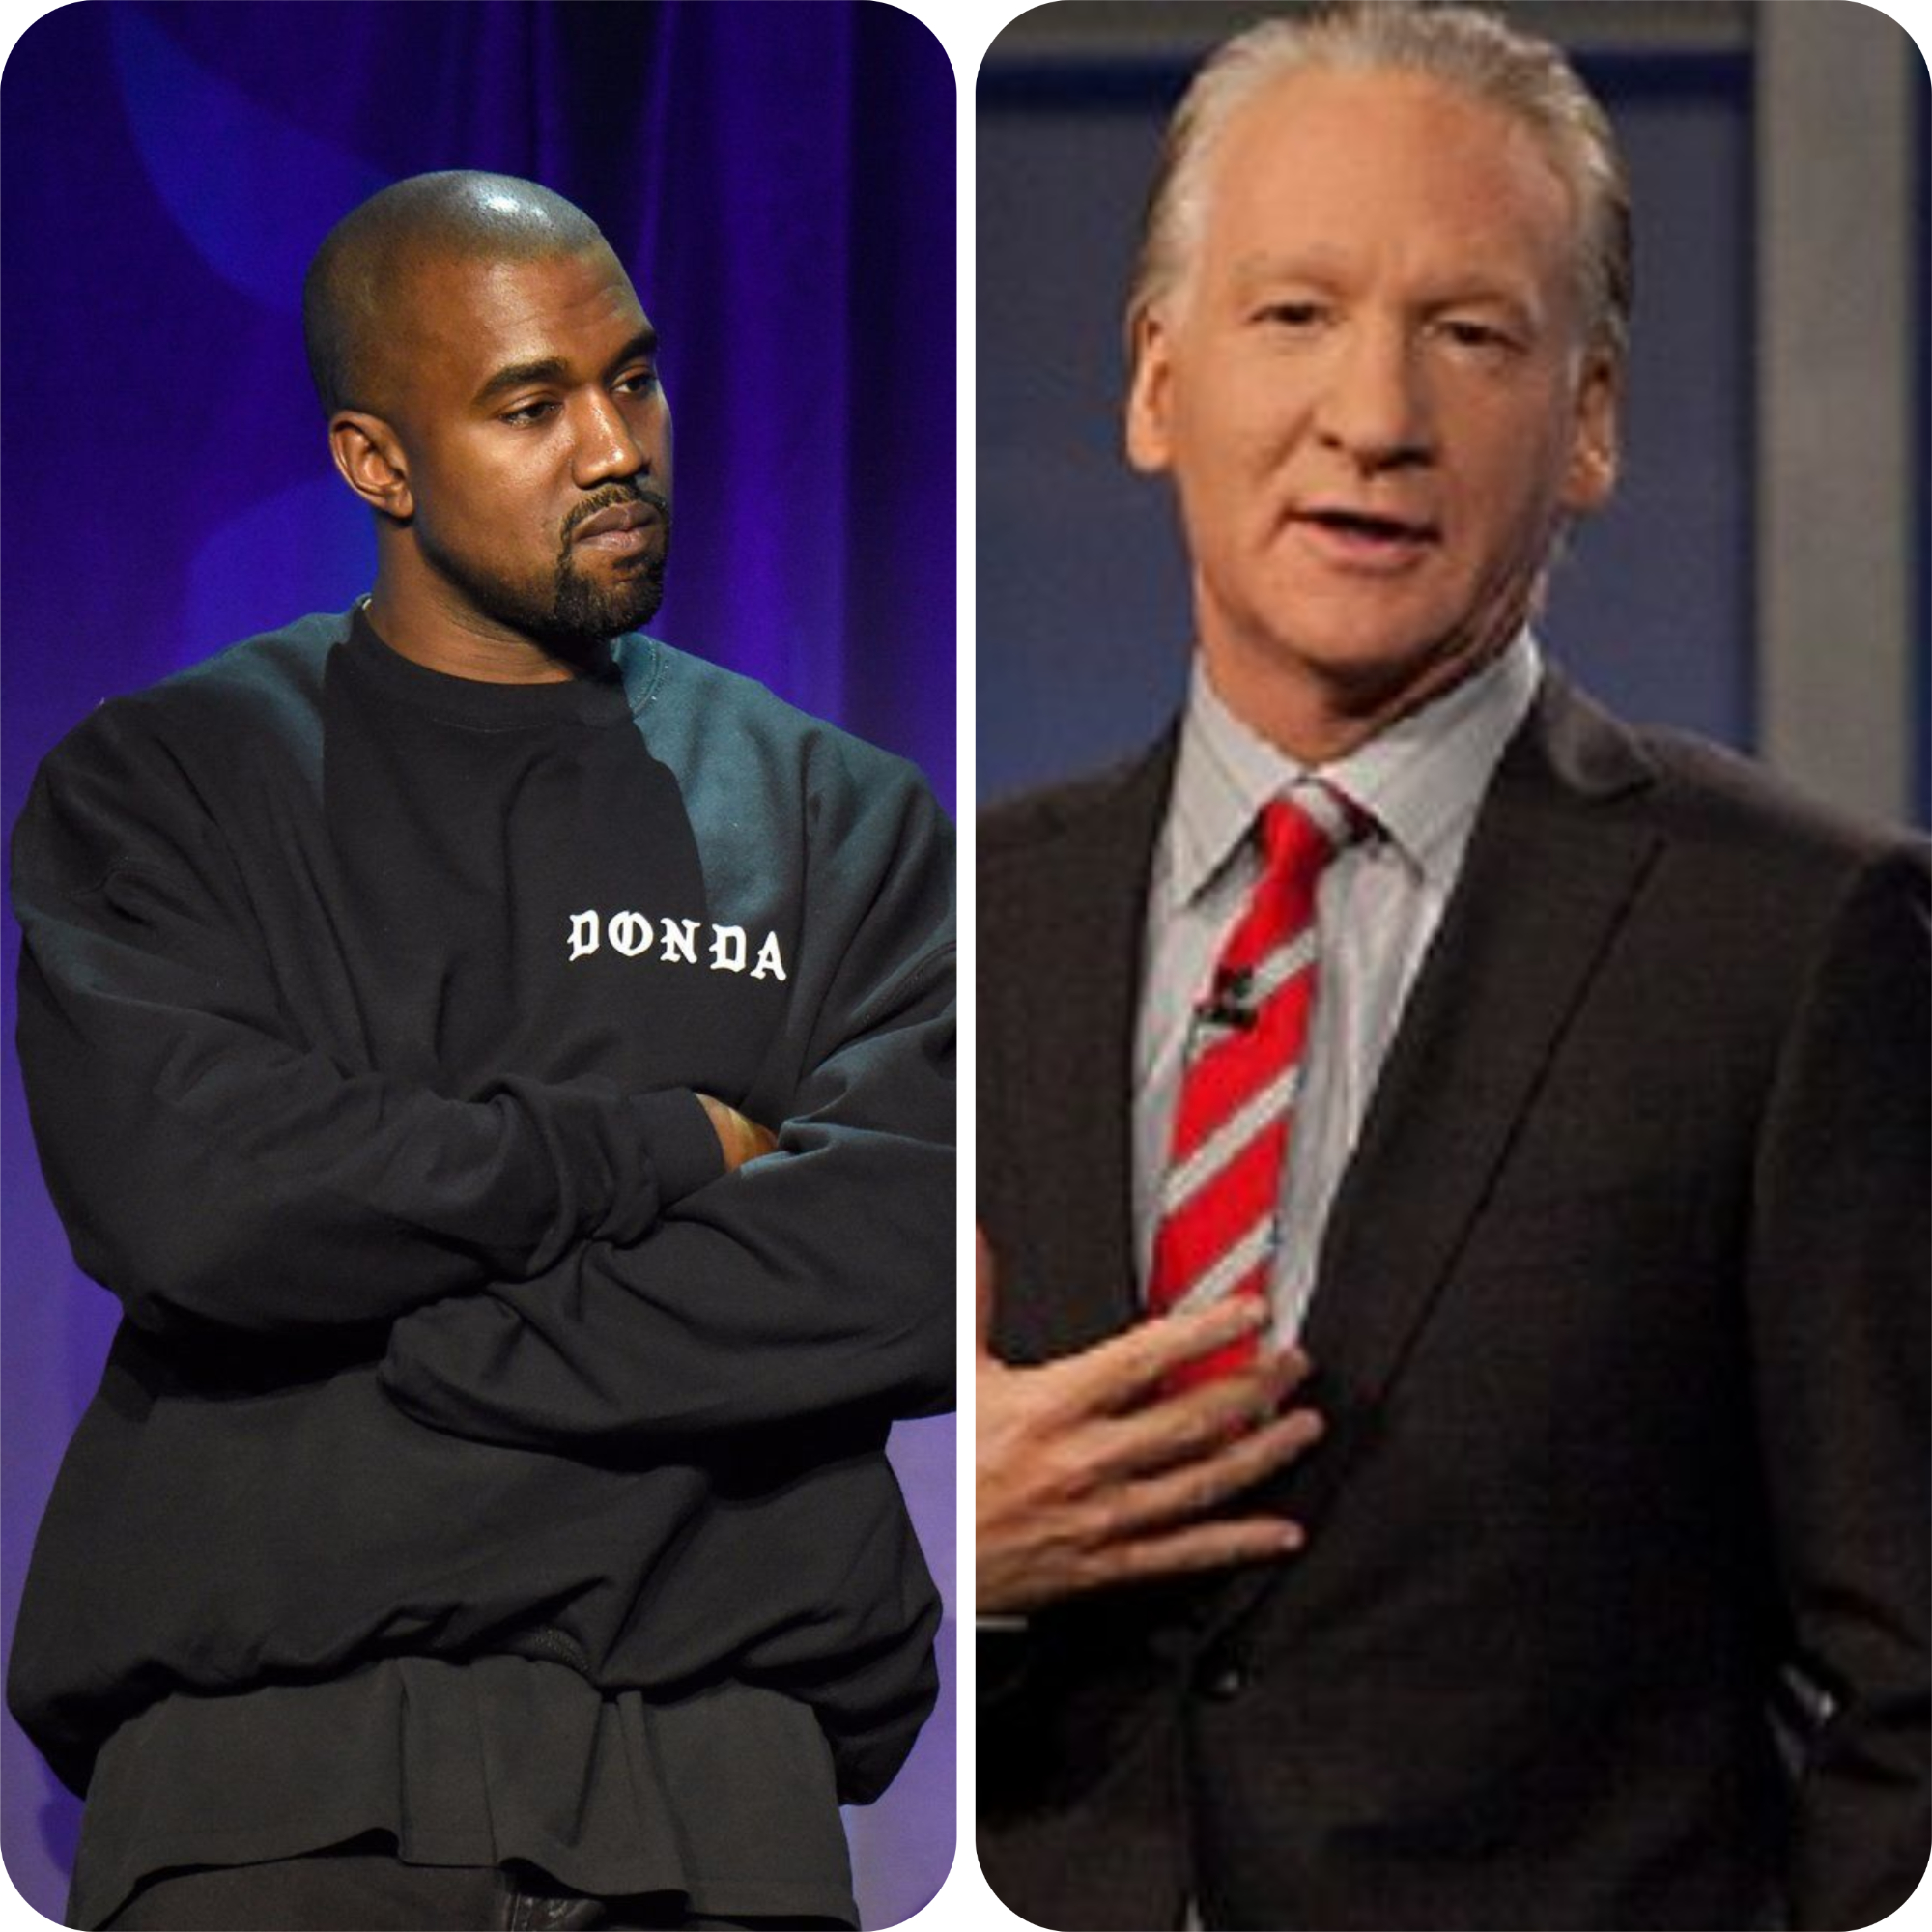 Bill Maher Talks Scrapping Interview With Kanye West, a 'Very Charming Anti-Semite'